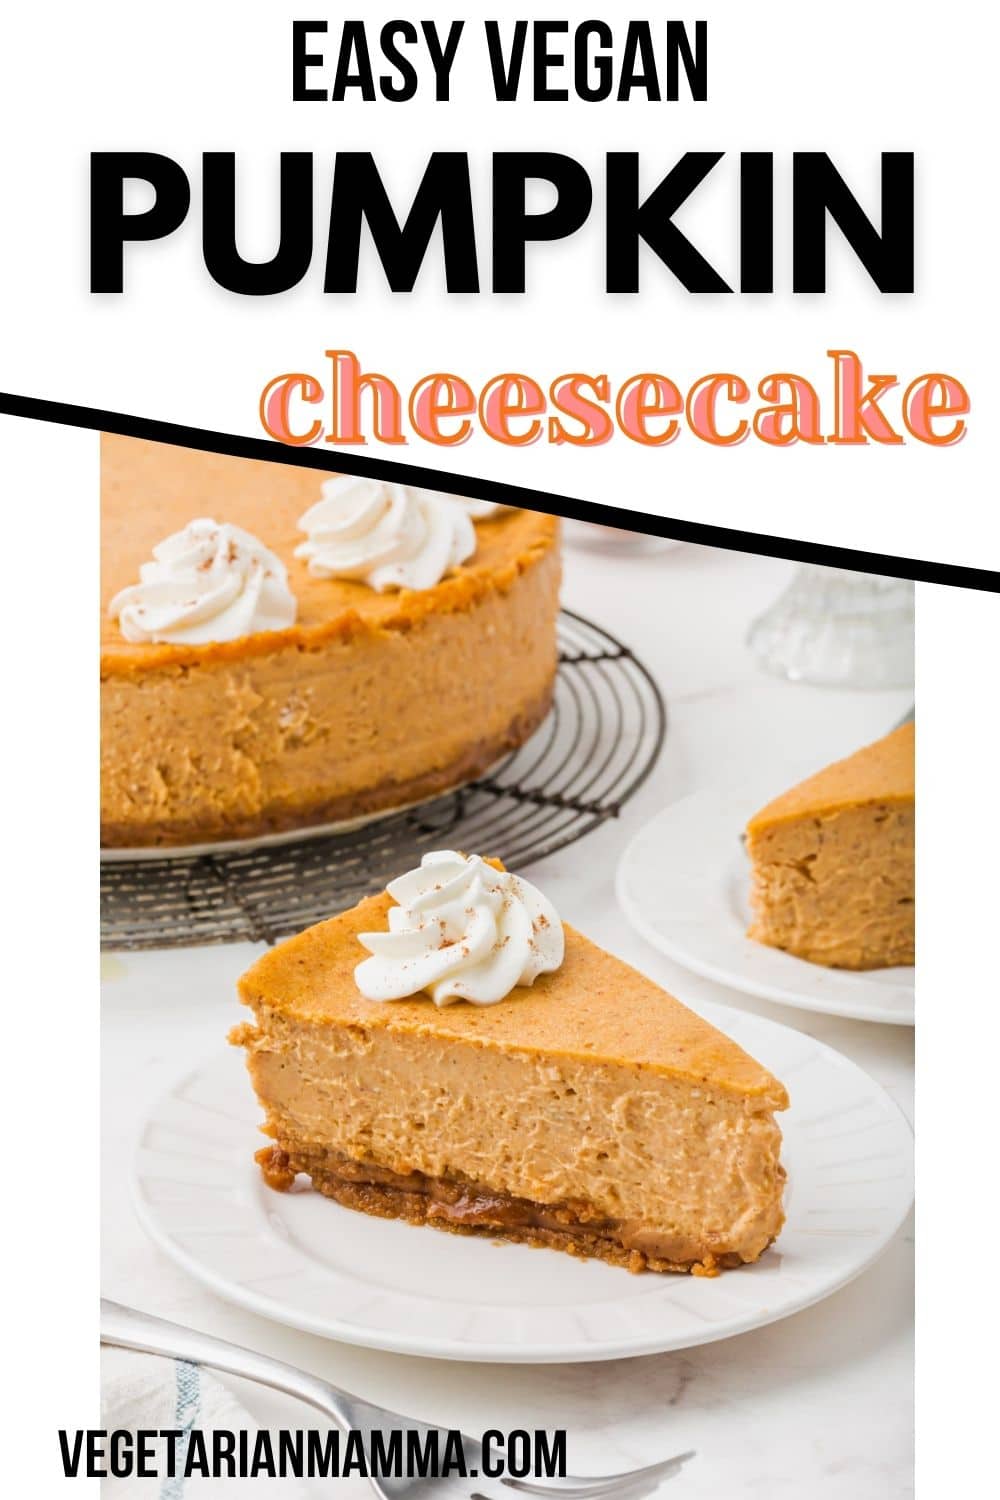 Vegan Pumpkin Cheesecake is luscious, creamy, and so easy! Make this amazing vegan dessert for holiday dinners packed with pumpkin spice flavor.